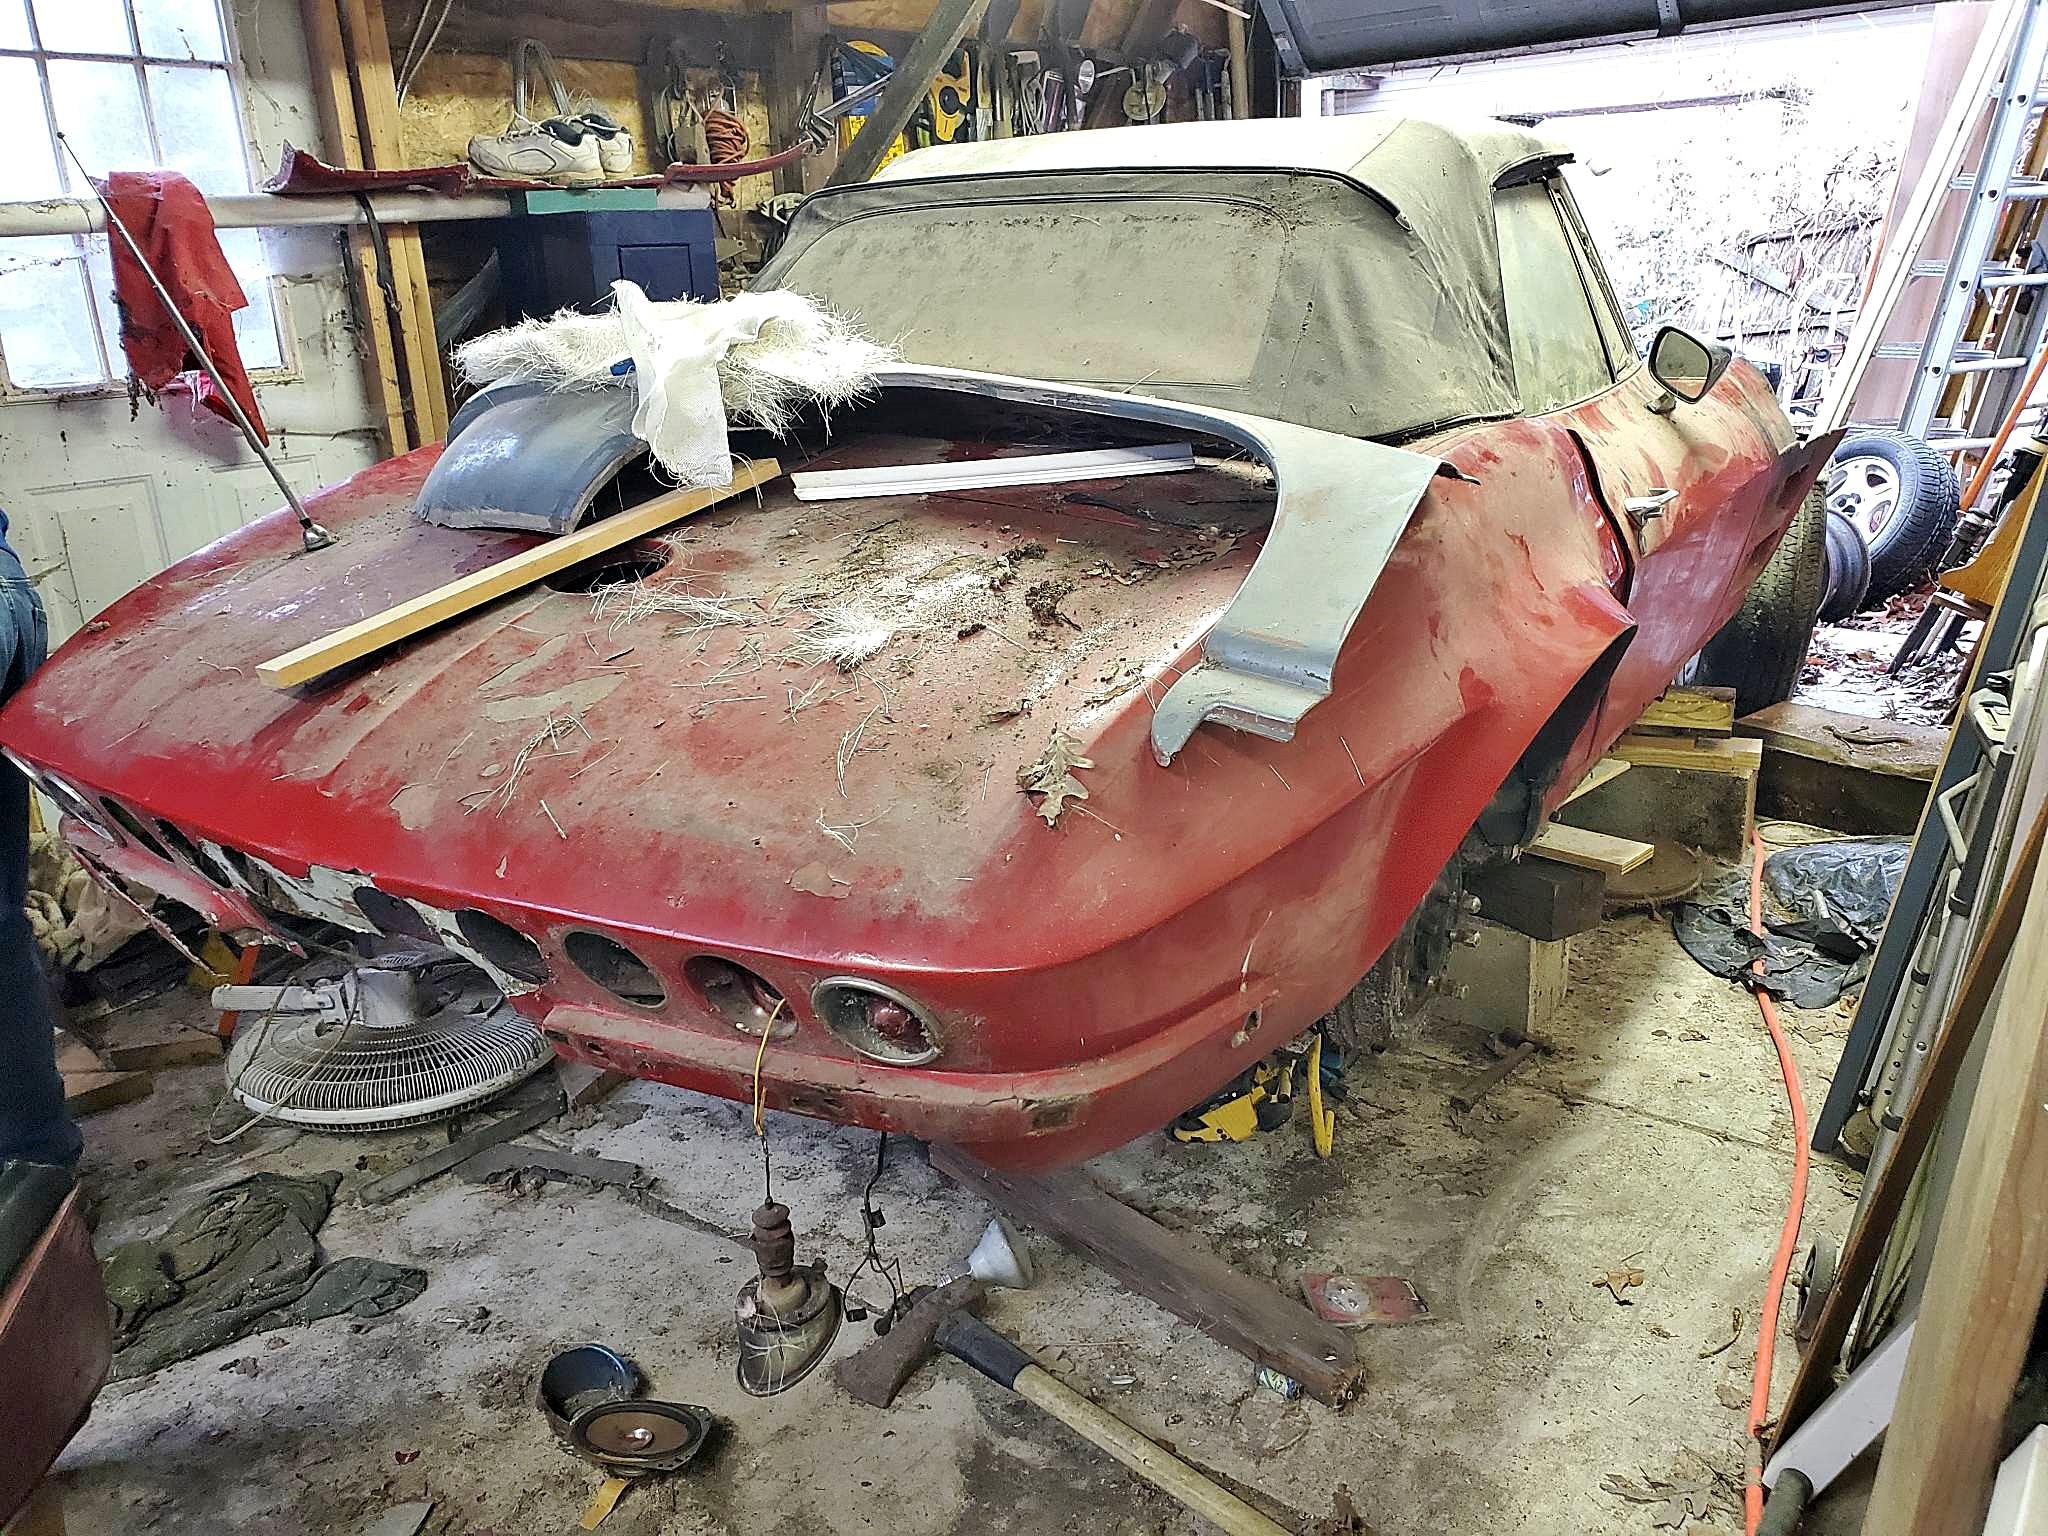 Unearthed: 1964 Corvette Custom Hiding Away Since the 1990s